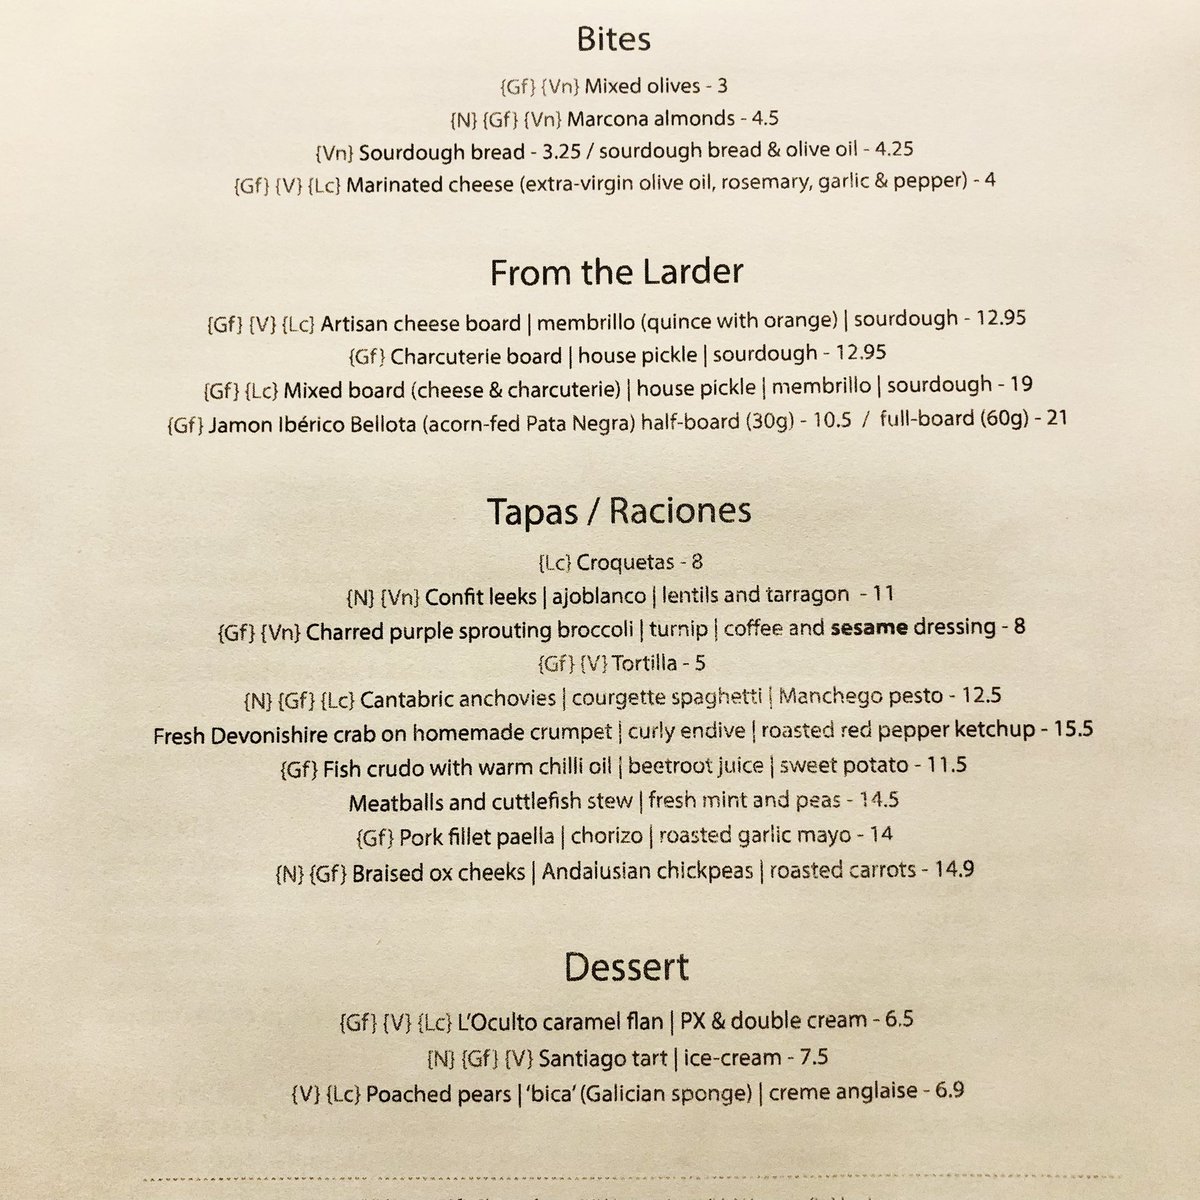 This weeks menu - a beauty… some really delicious tapas here… come join us… book online at loculto.co.uk using ReaDiary or just walk-in 
#loculto #se4 #brockley #foodwithfriends #eatwell #realfood #womenchefs #spanishchefs #neighbourhoodrestaurant #local #indiebiz